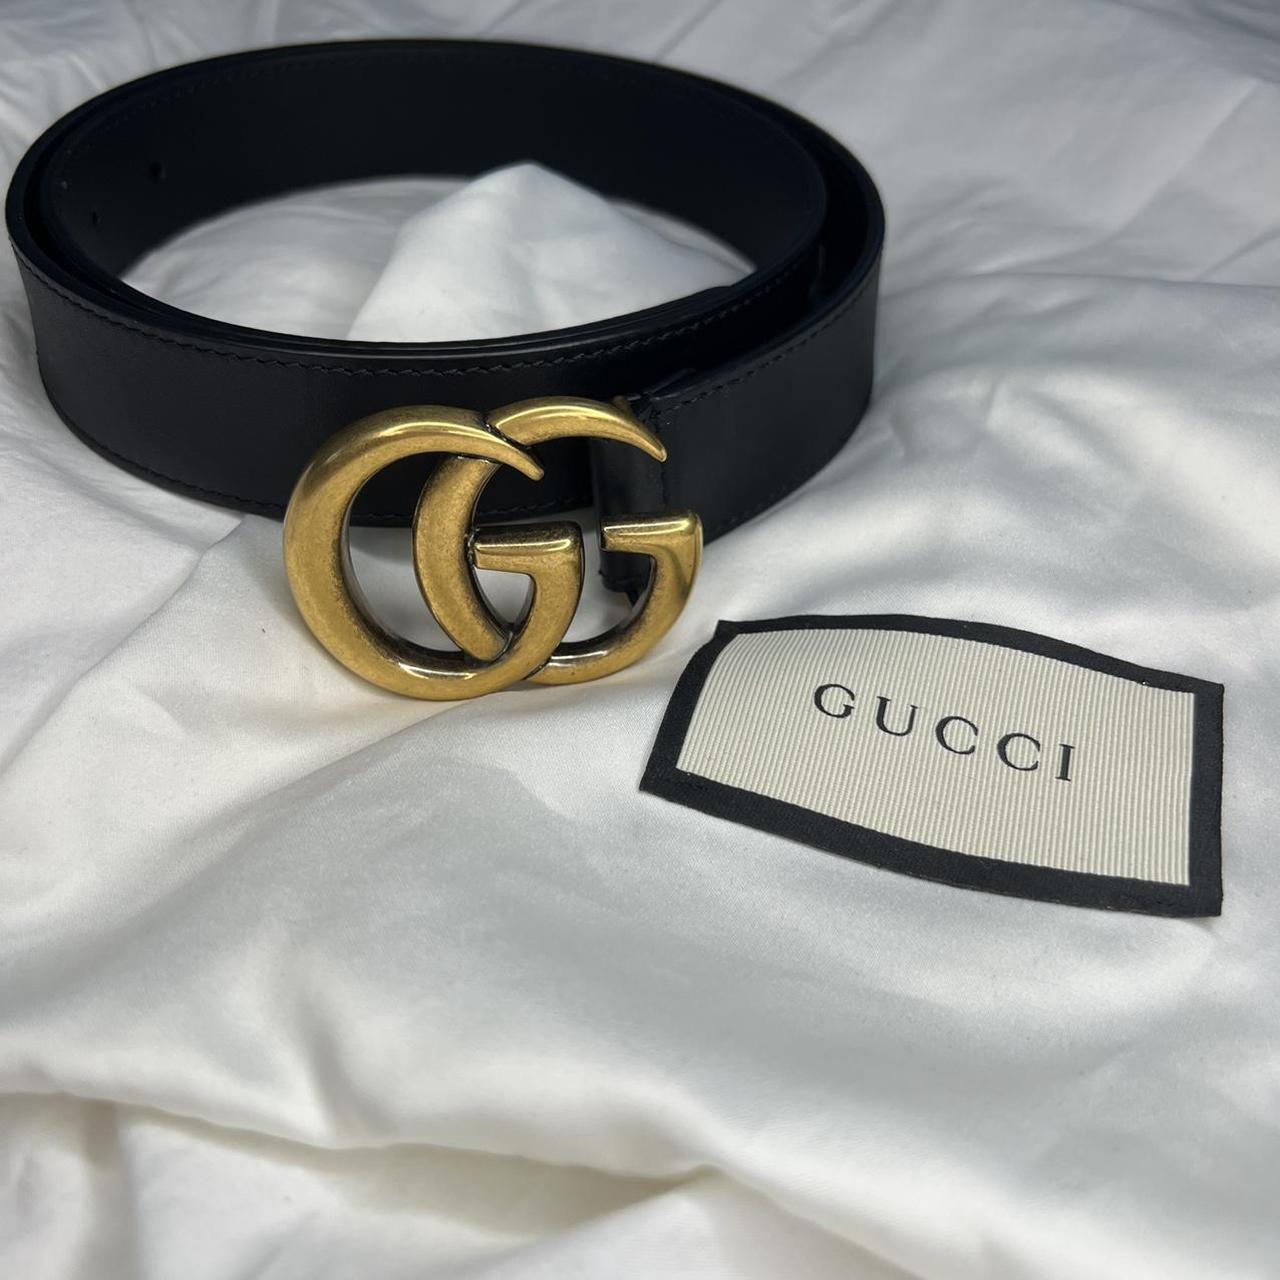 Gucci Women's Faded Leather Belt with Double G Buckle